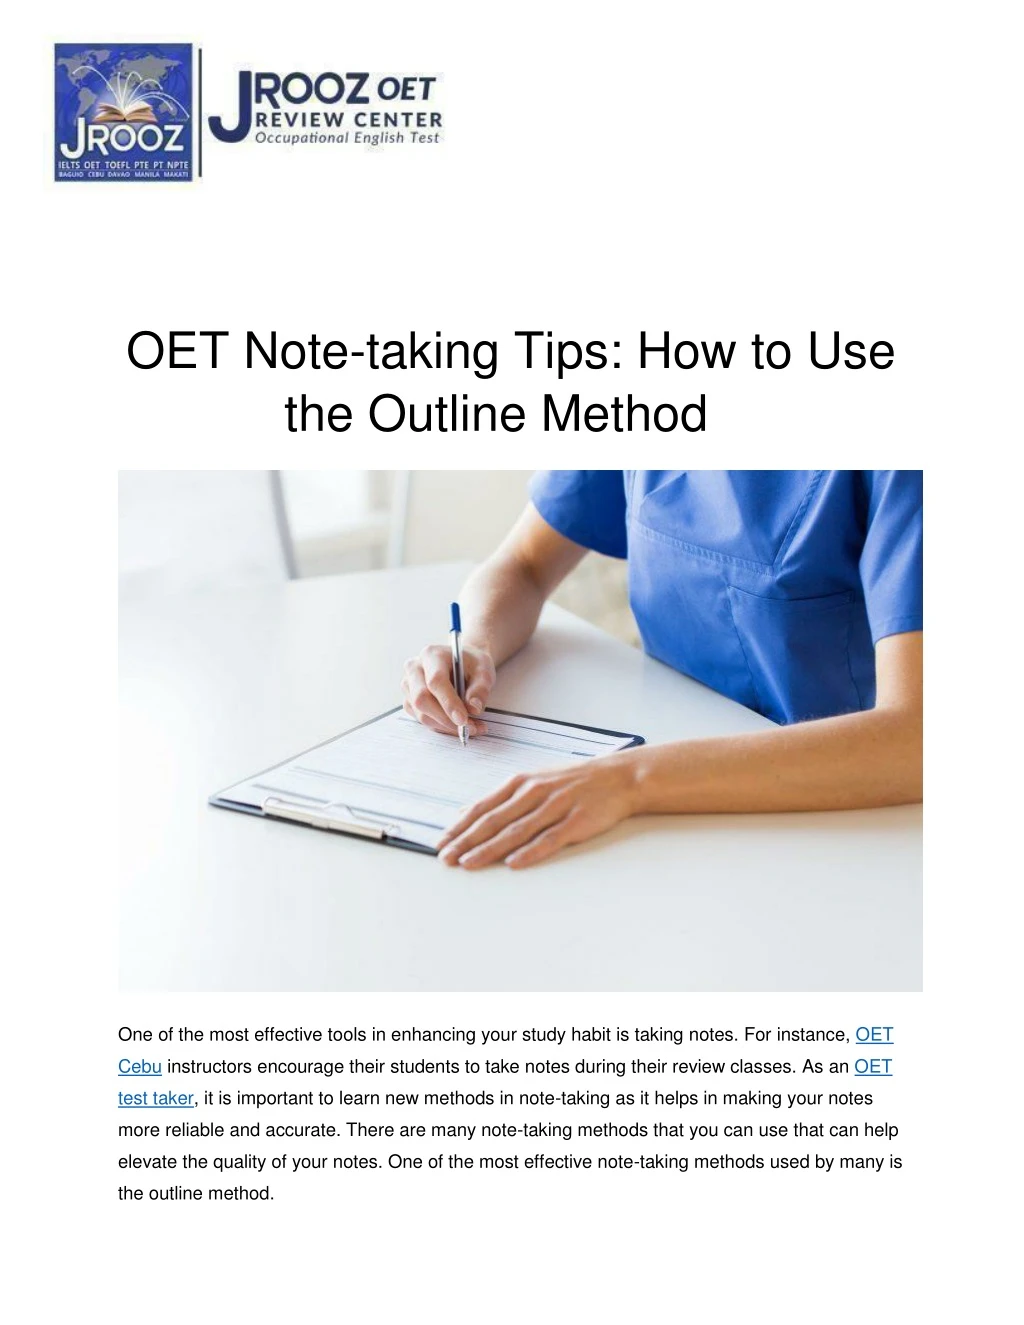 oet note taking tips how to use the outline method